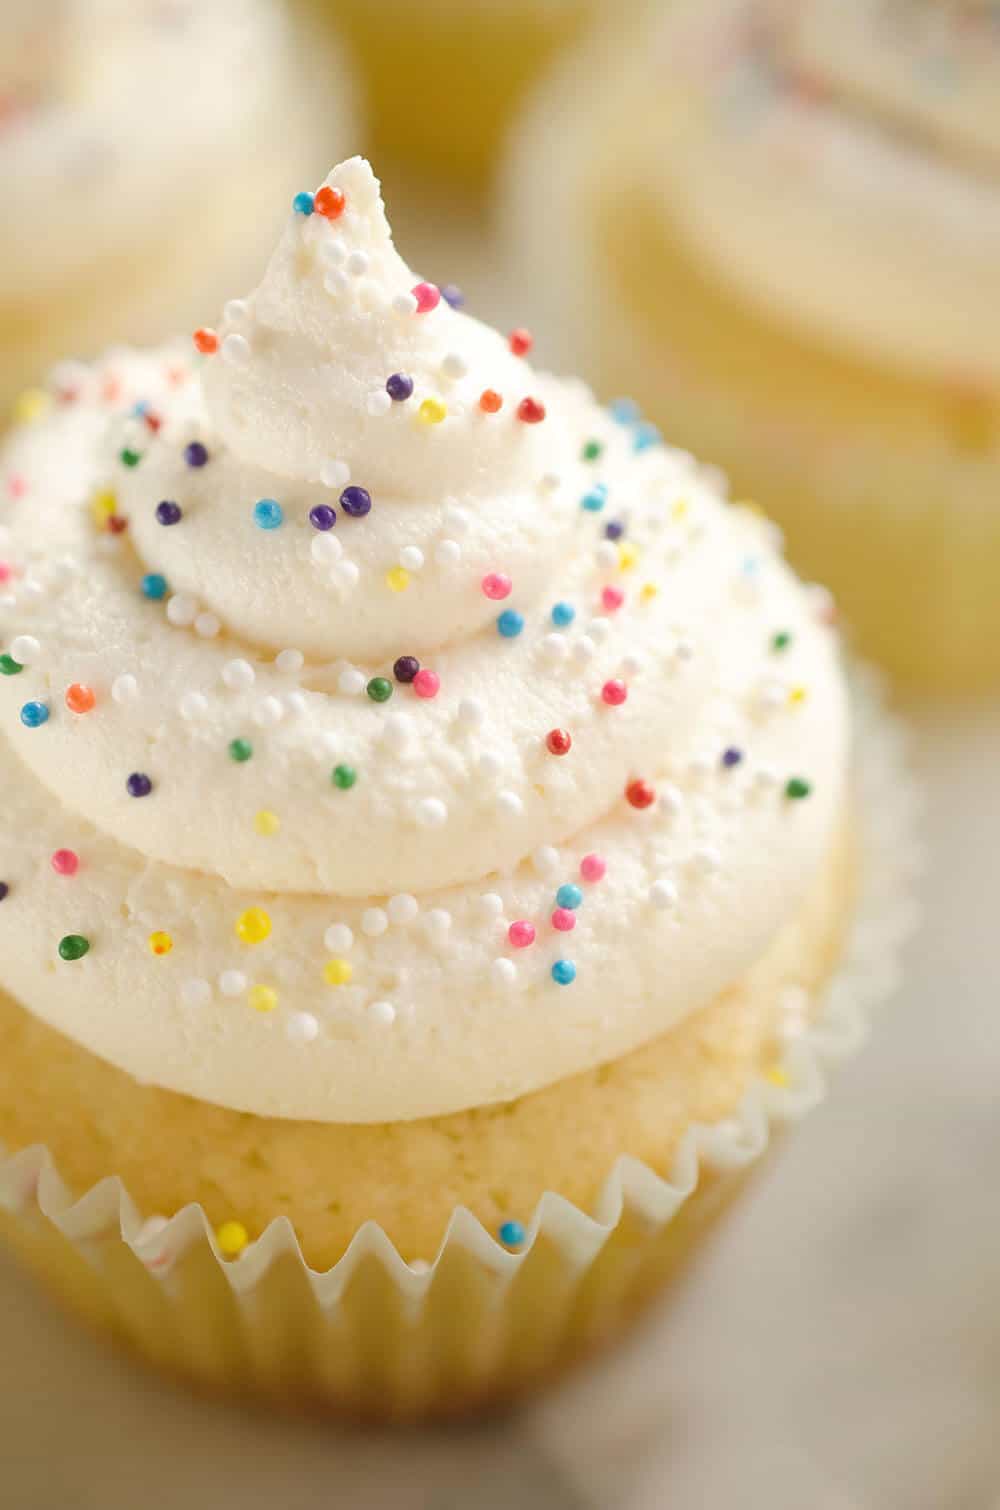 Best Birthday Cupcakes are the perfect dessert recipe for your special celebration! A moist vanilla homemade cake is topped with rich whipped buttercream for a sweet treat everyone will love.